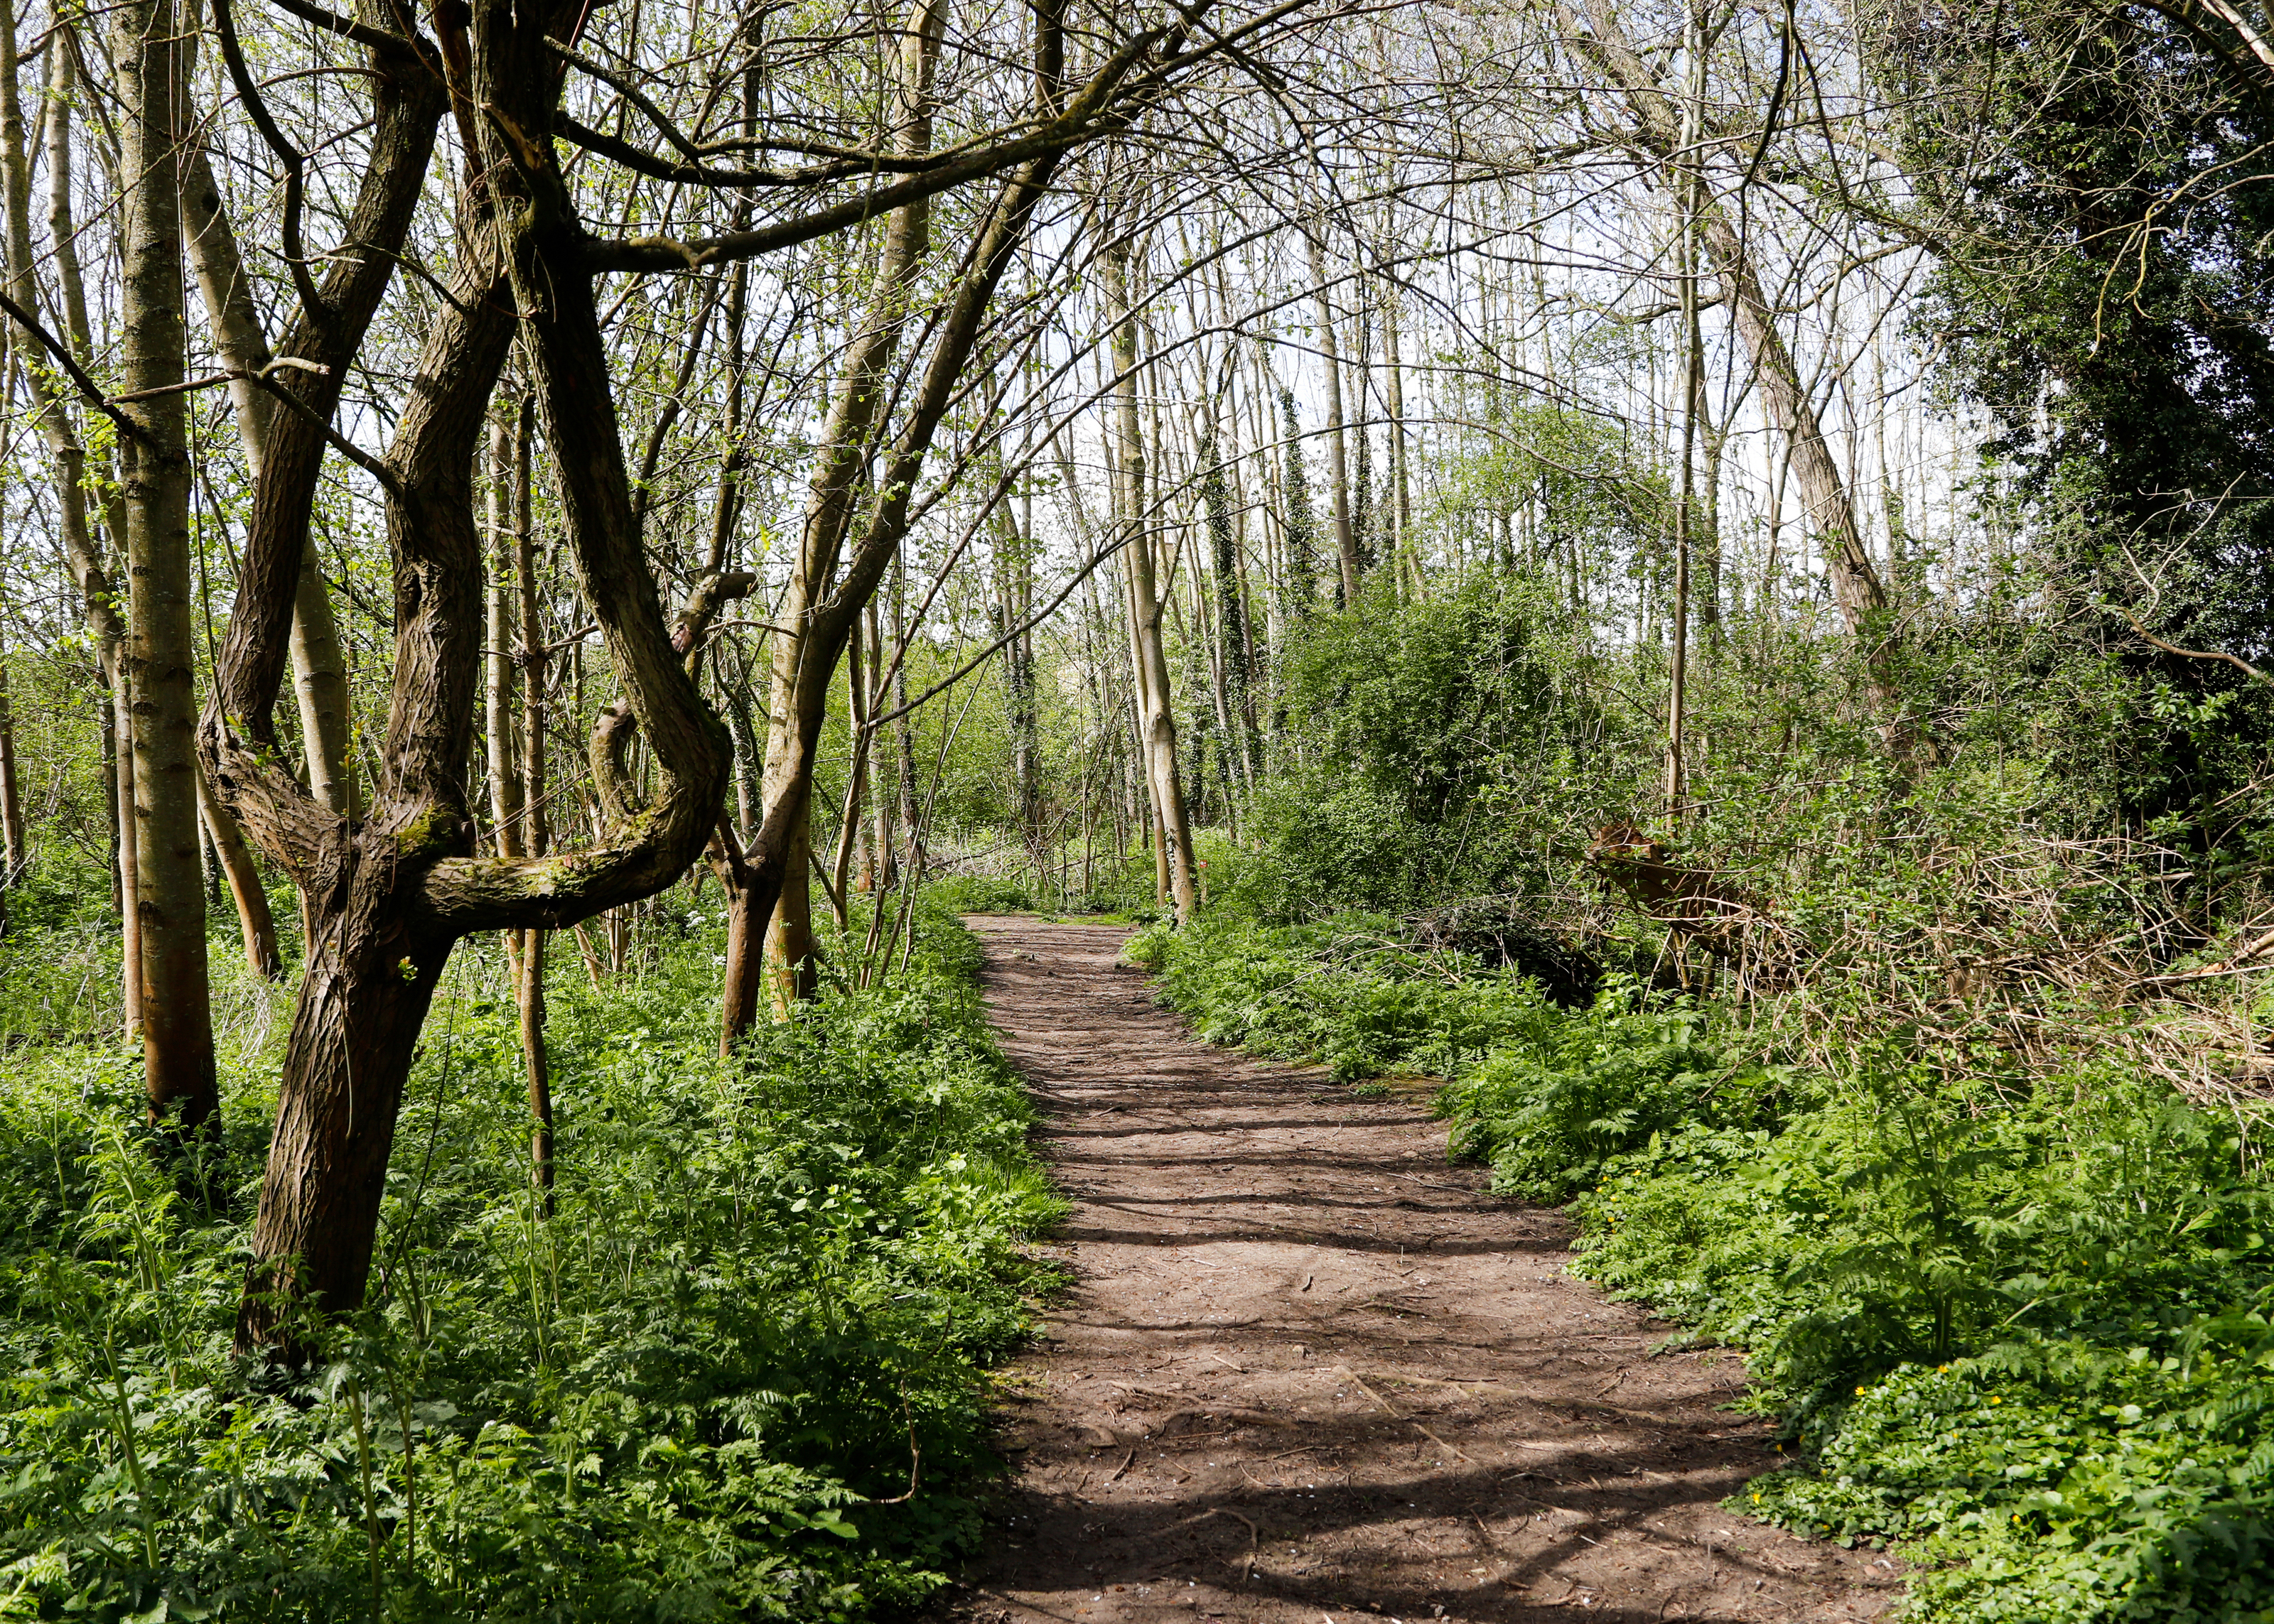 A footpath through the Forest on a sunny day with trees on the left hand side and green undergrowth either side 